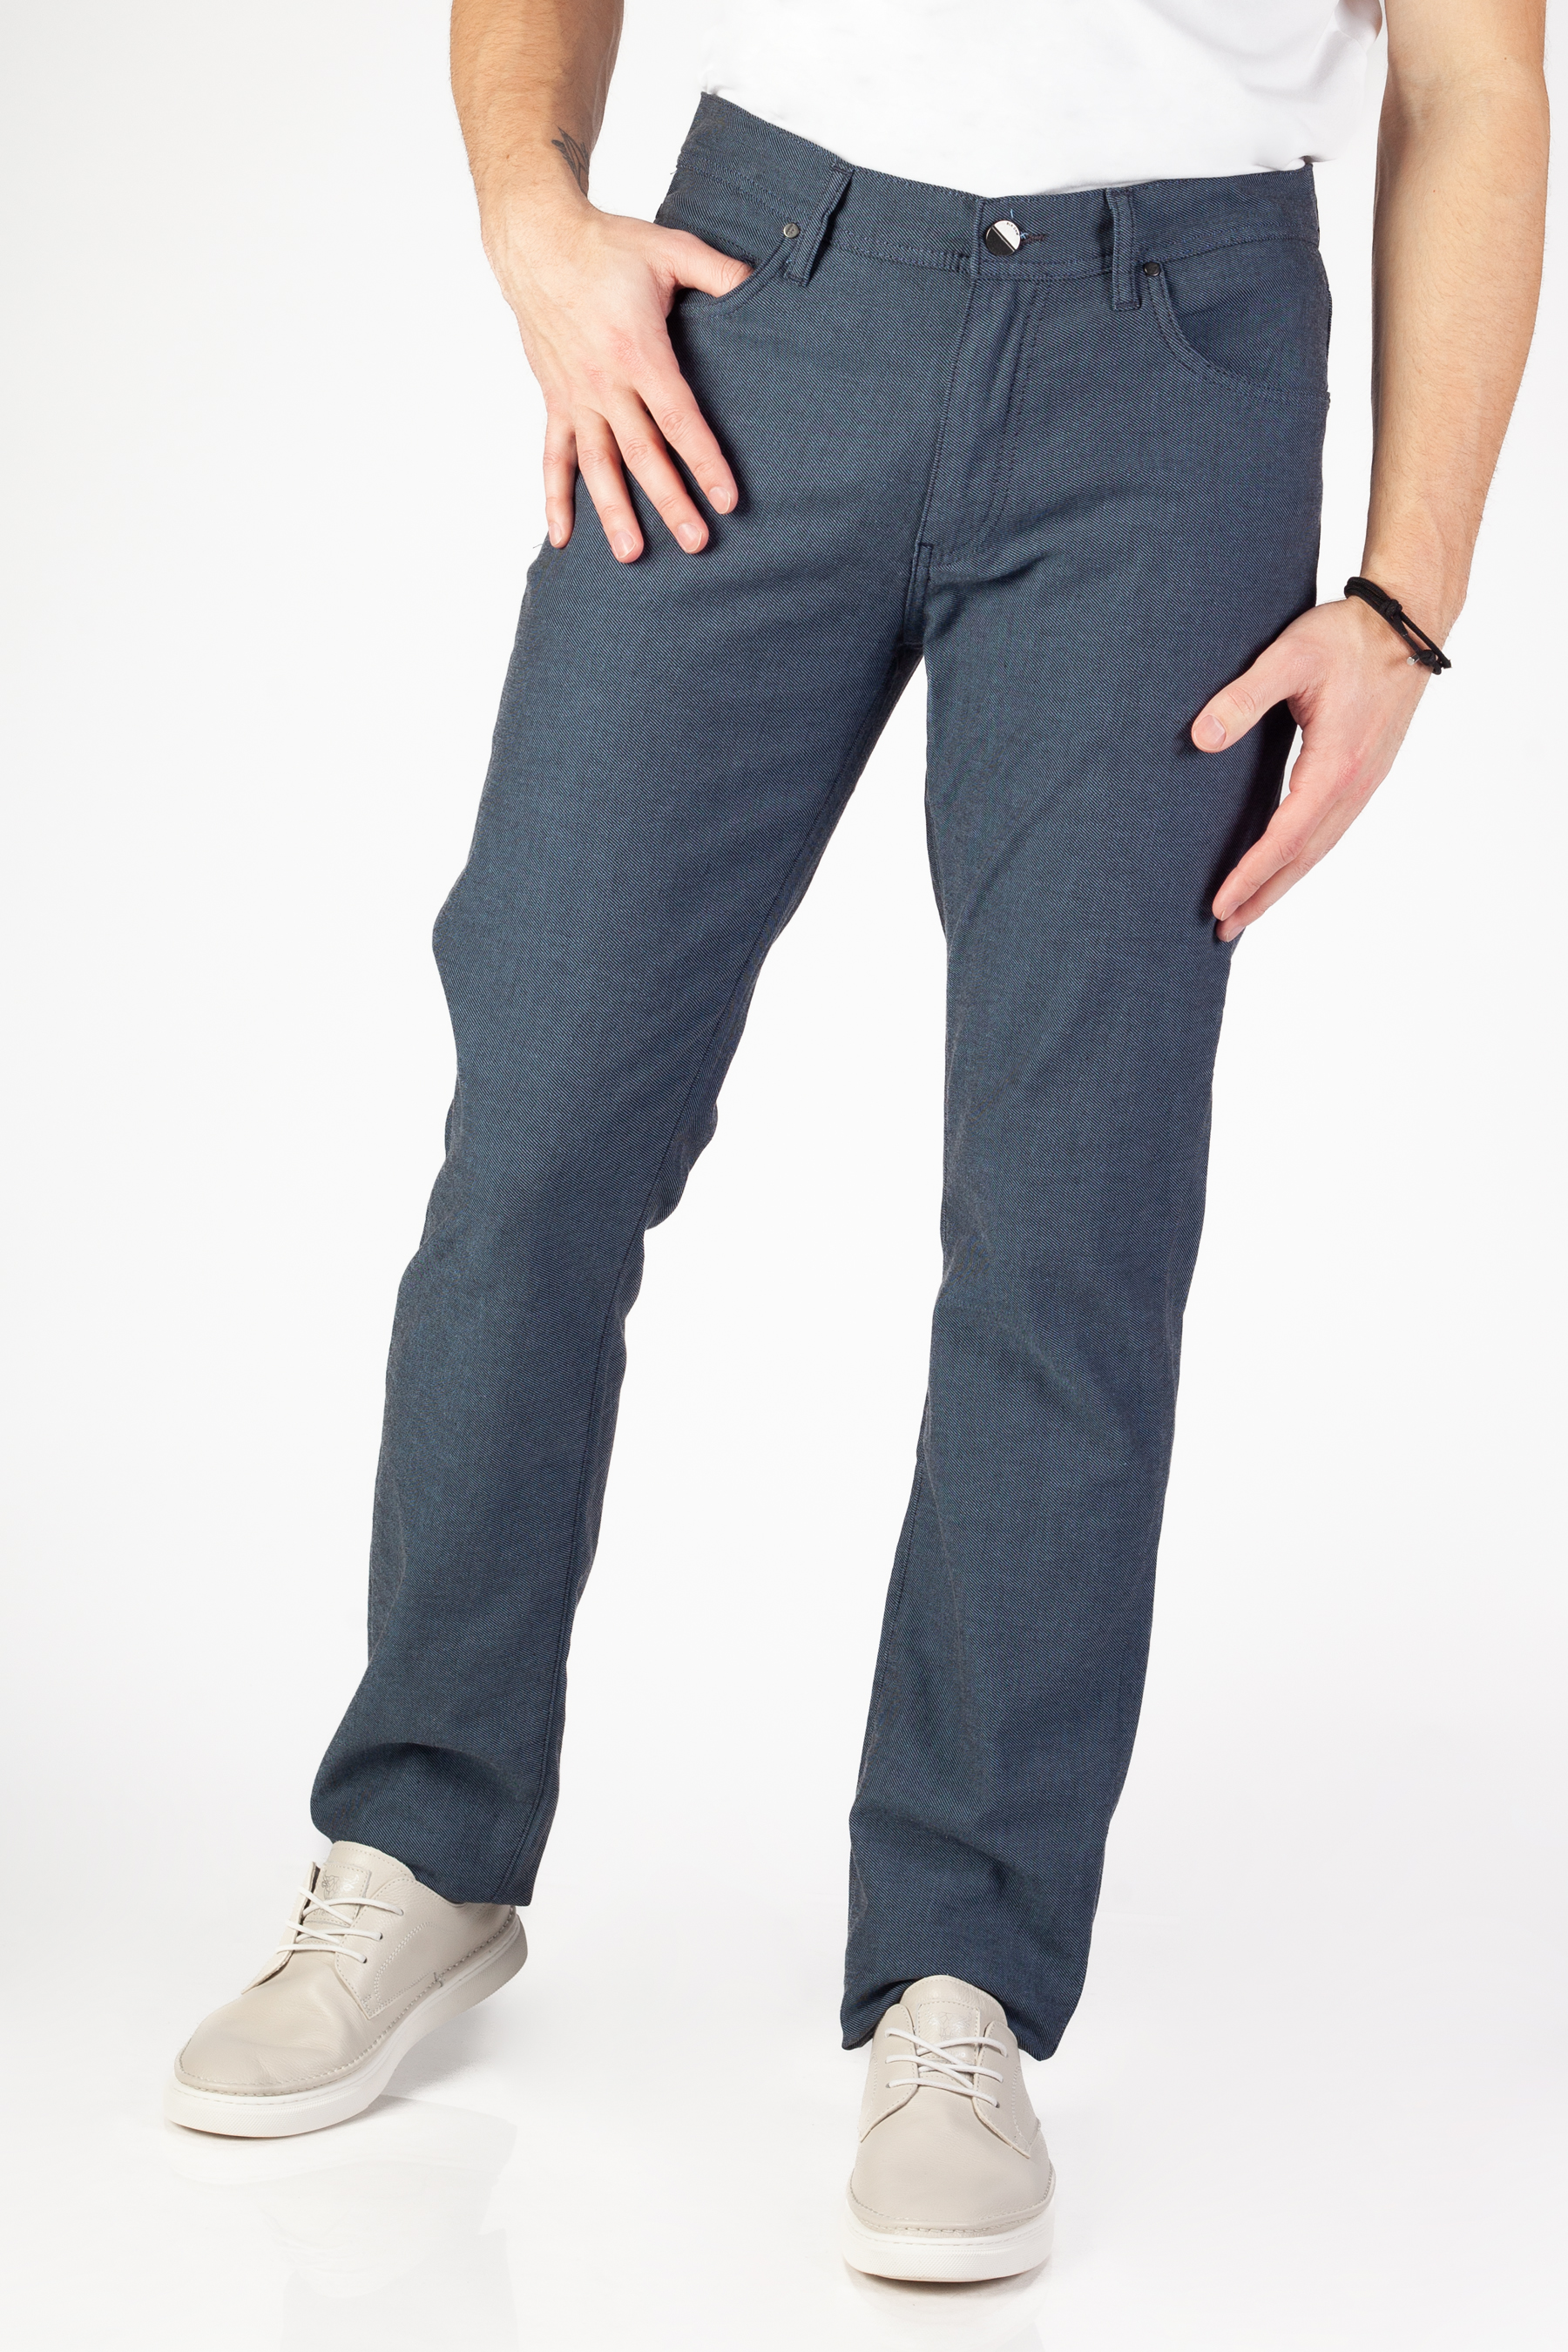 Chino pants BLK JEANS 8255-103-134-201